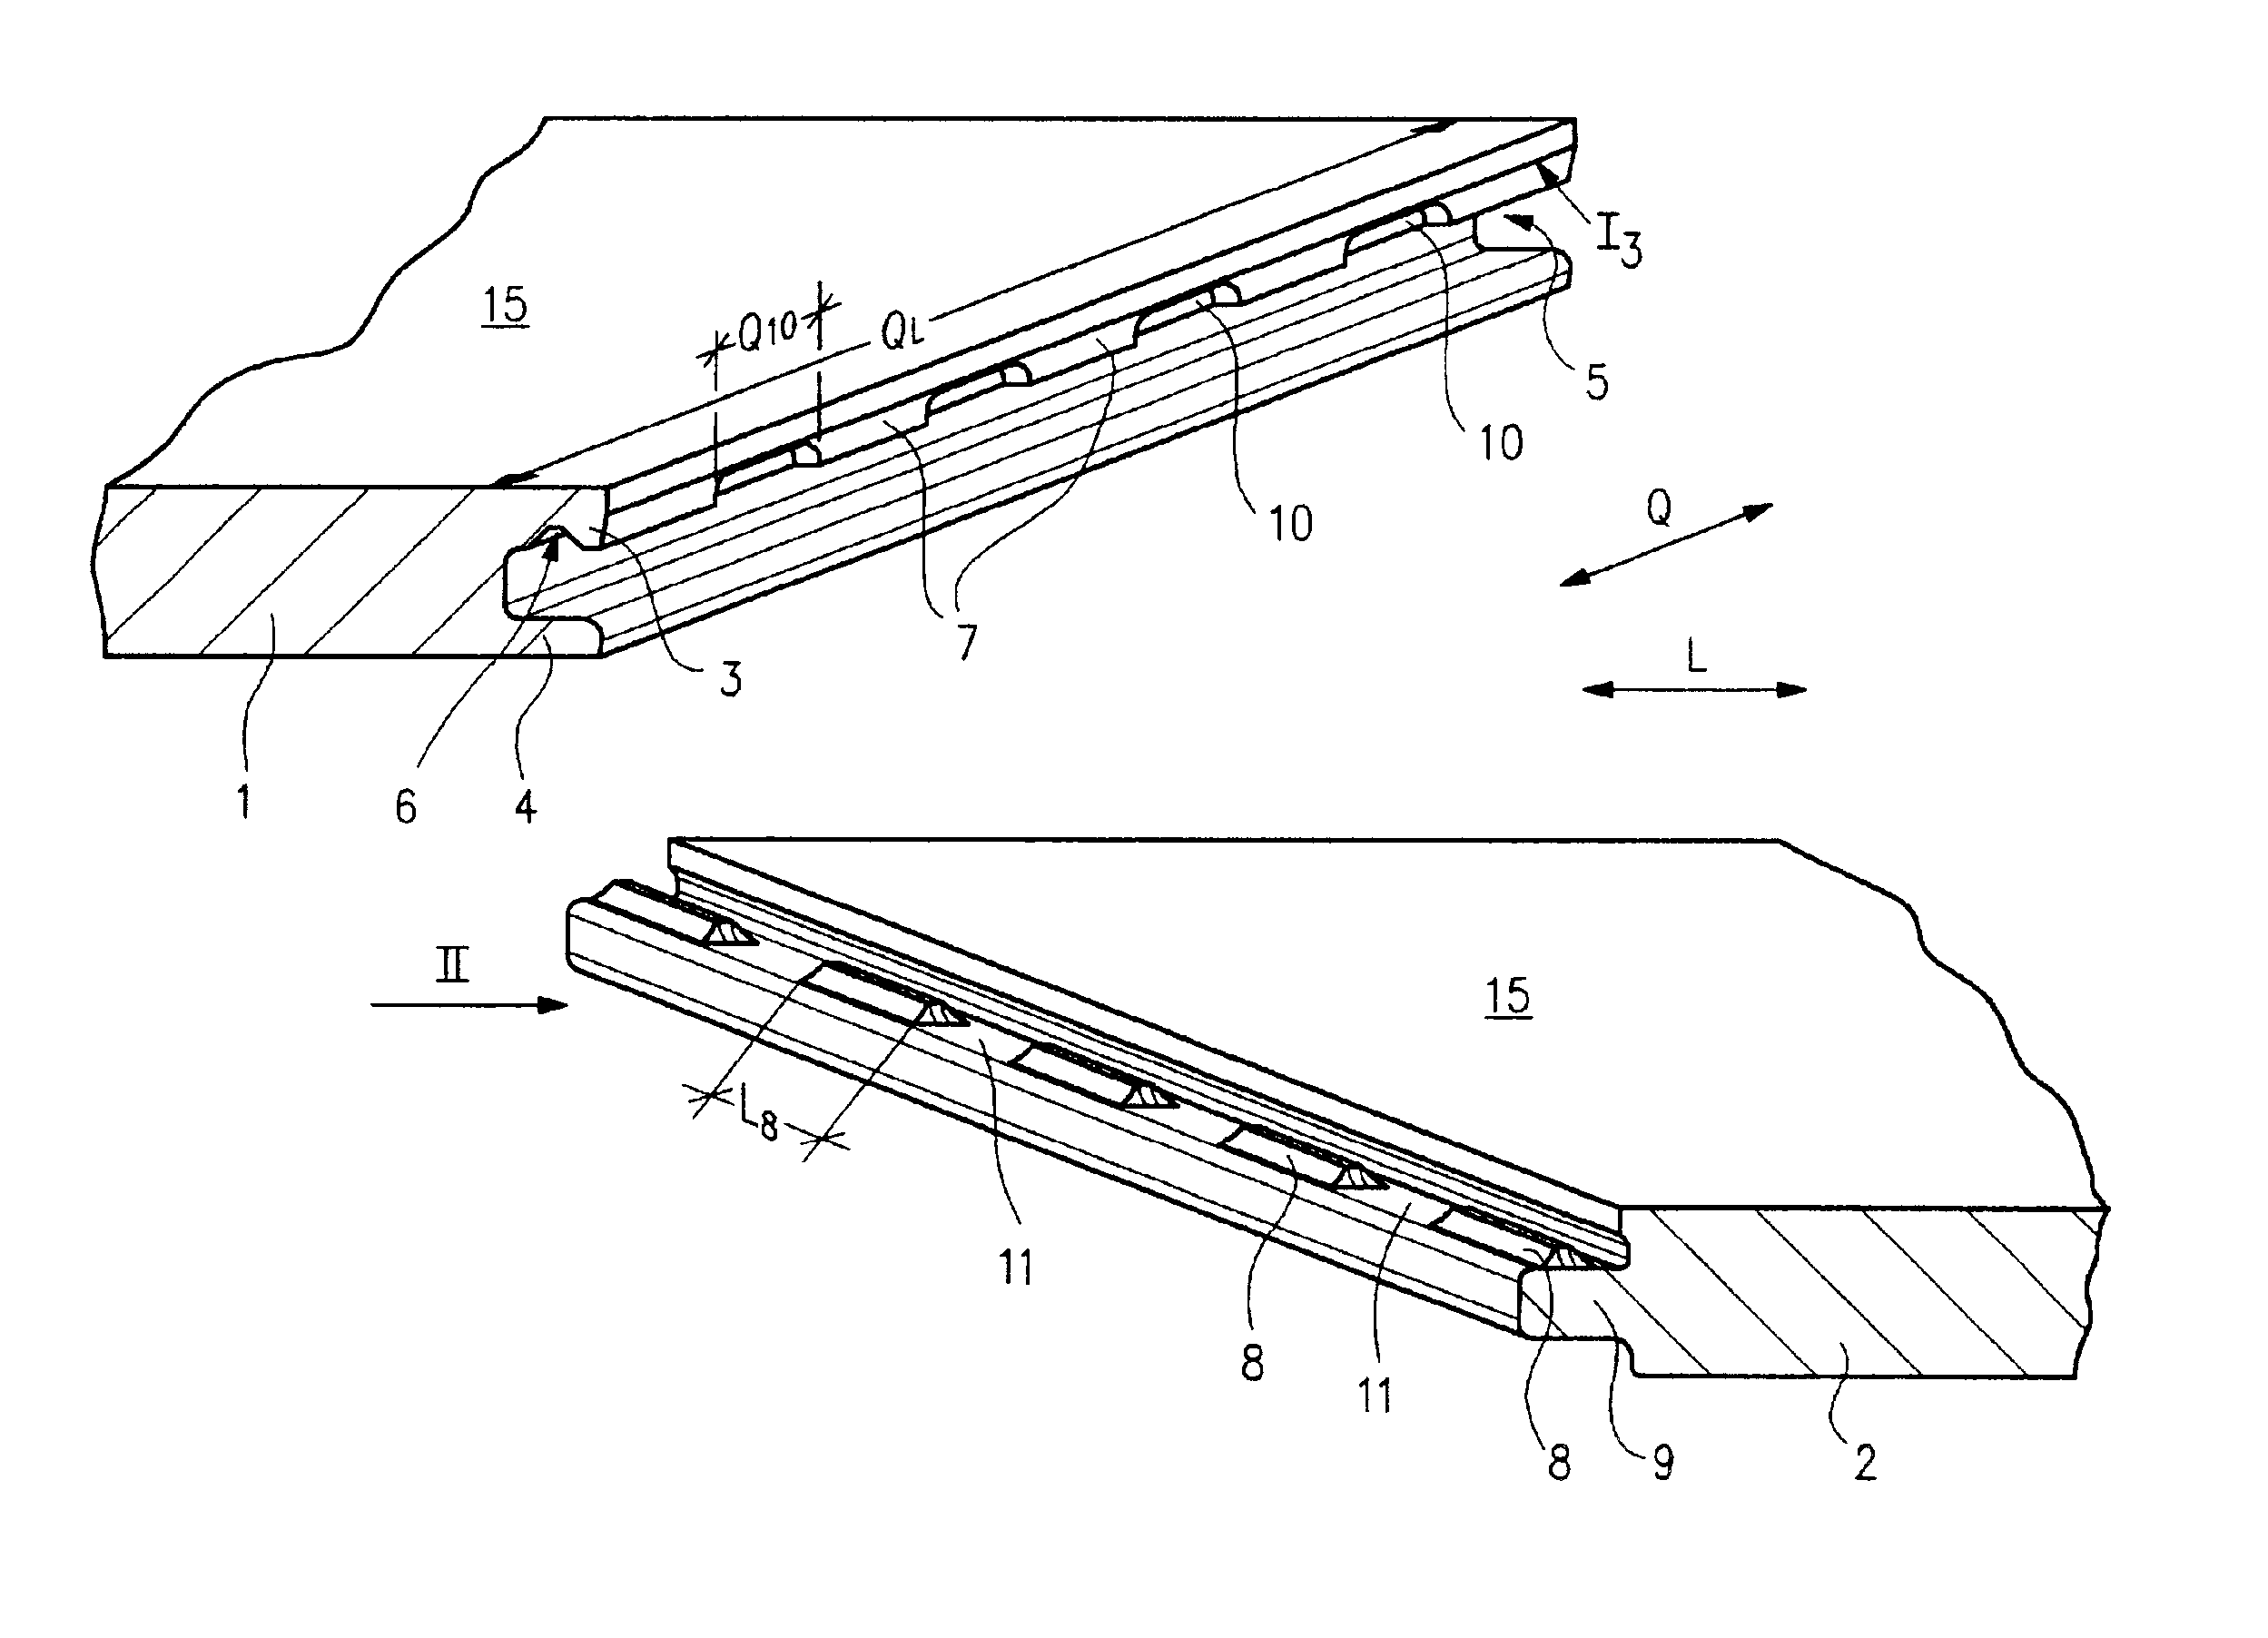 Structural panels and method of connecting same